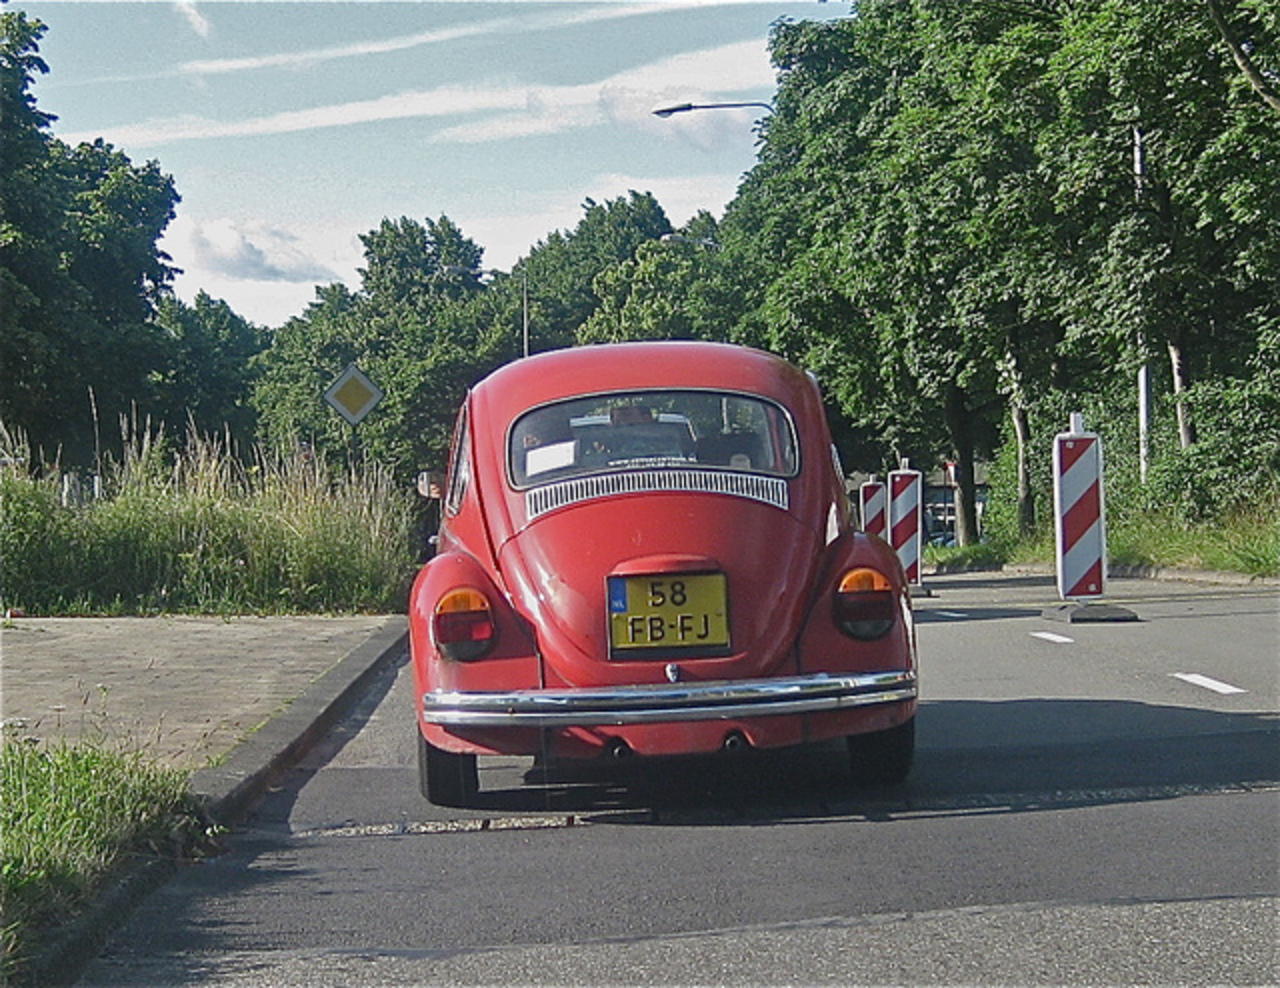 VOLKSWAGEN Beetle 1200, 1984 while driving | Flickr - Photo Sharing!